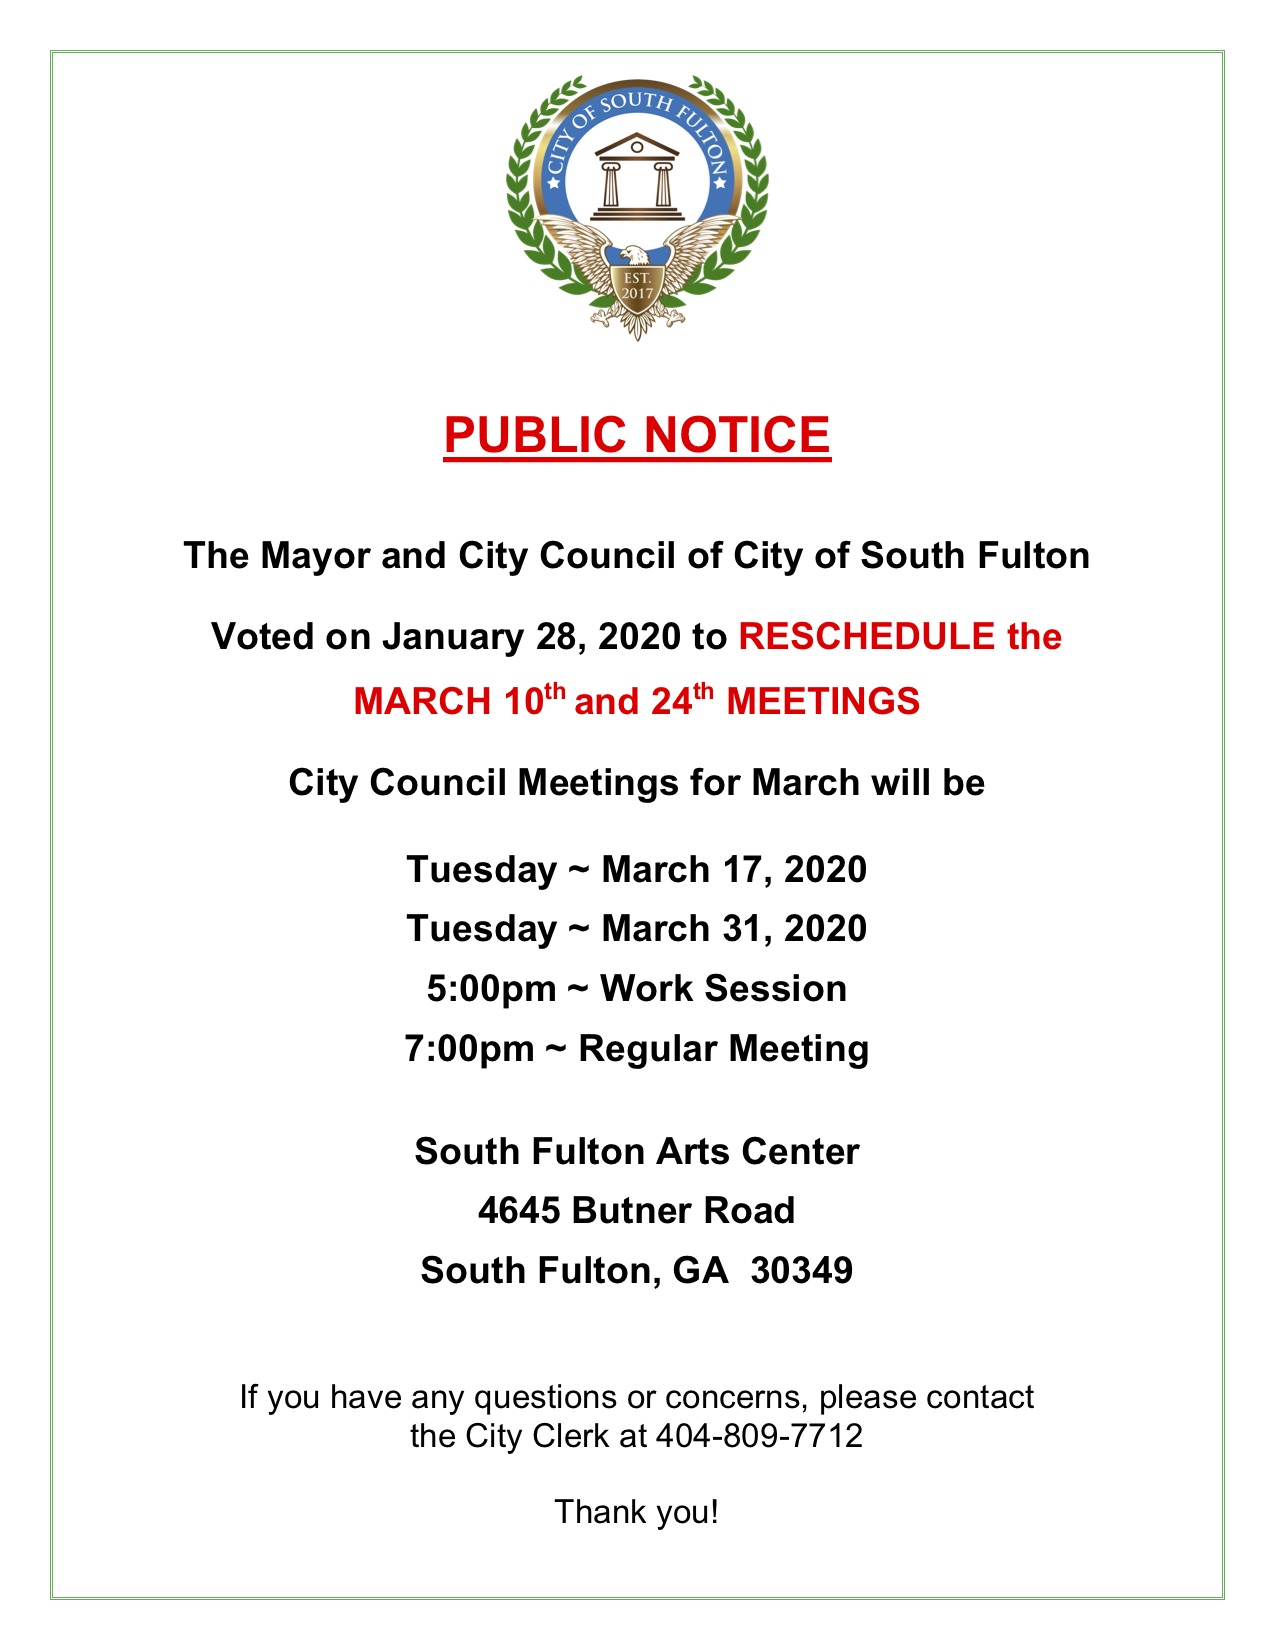 South Fulton Regular Meeting March Schedule